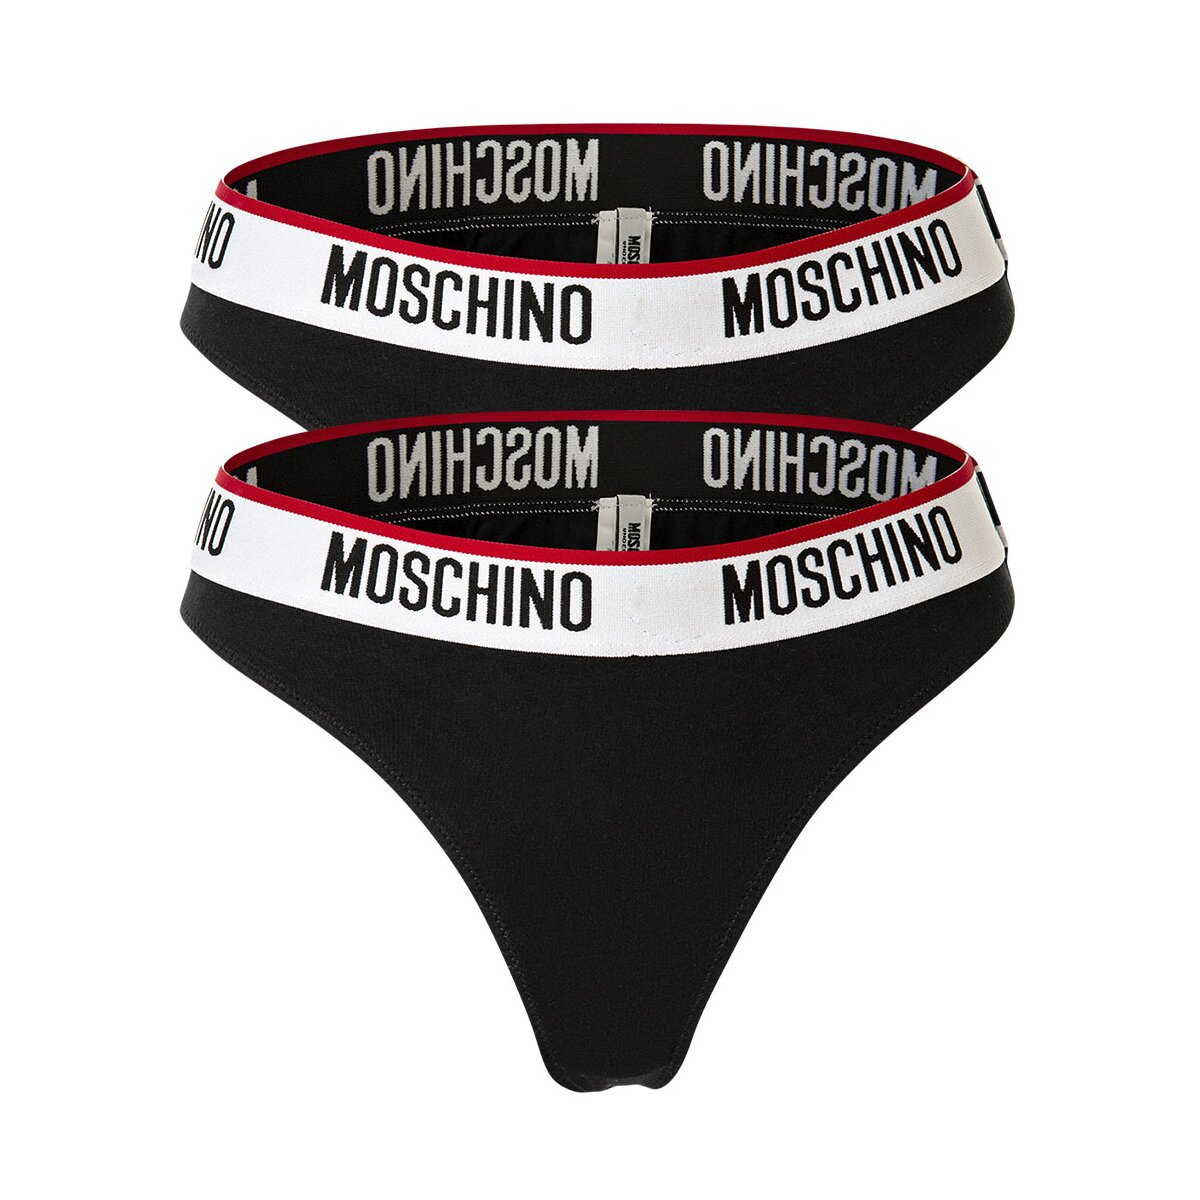 MOSCHINO women's thongs 2-pack - Underpants with logo waistband, 58,95 €